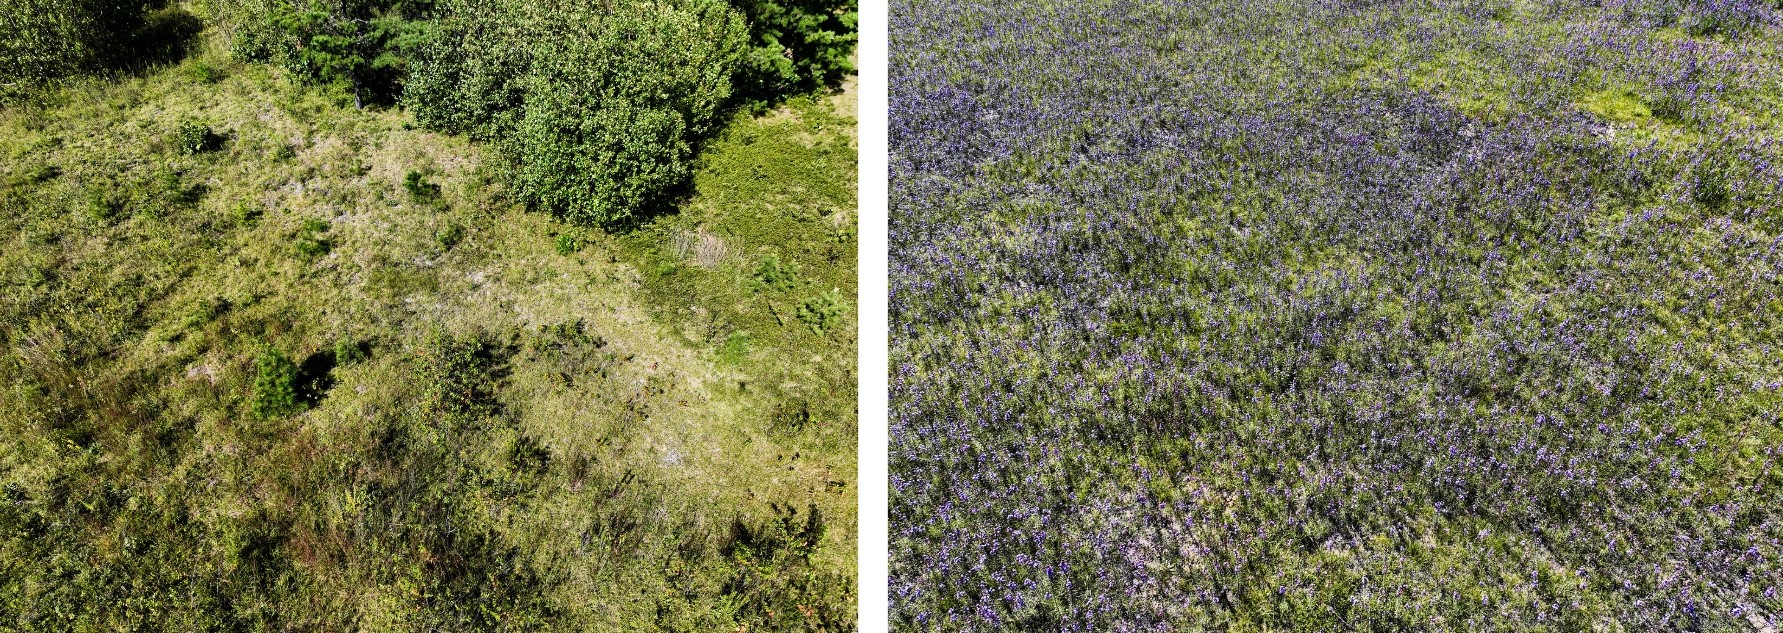 An aerial view of land that was burned several years ago compared with an aerial view of land burned last year. The first has thicker vegetation with more woody plants, and the second is blanketed with purple flowers.